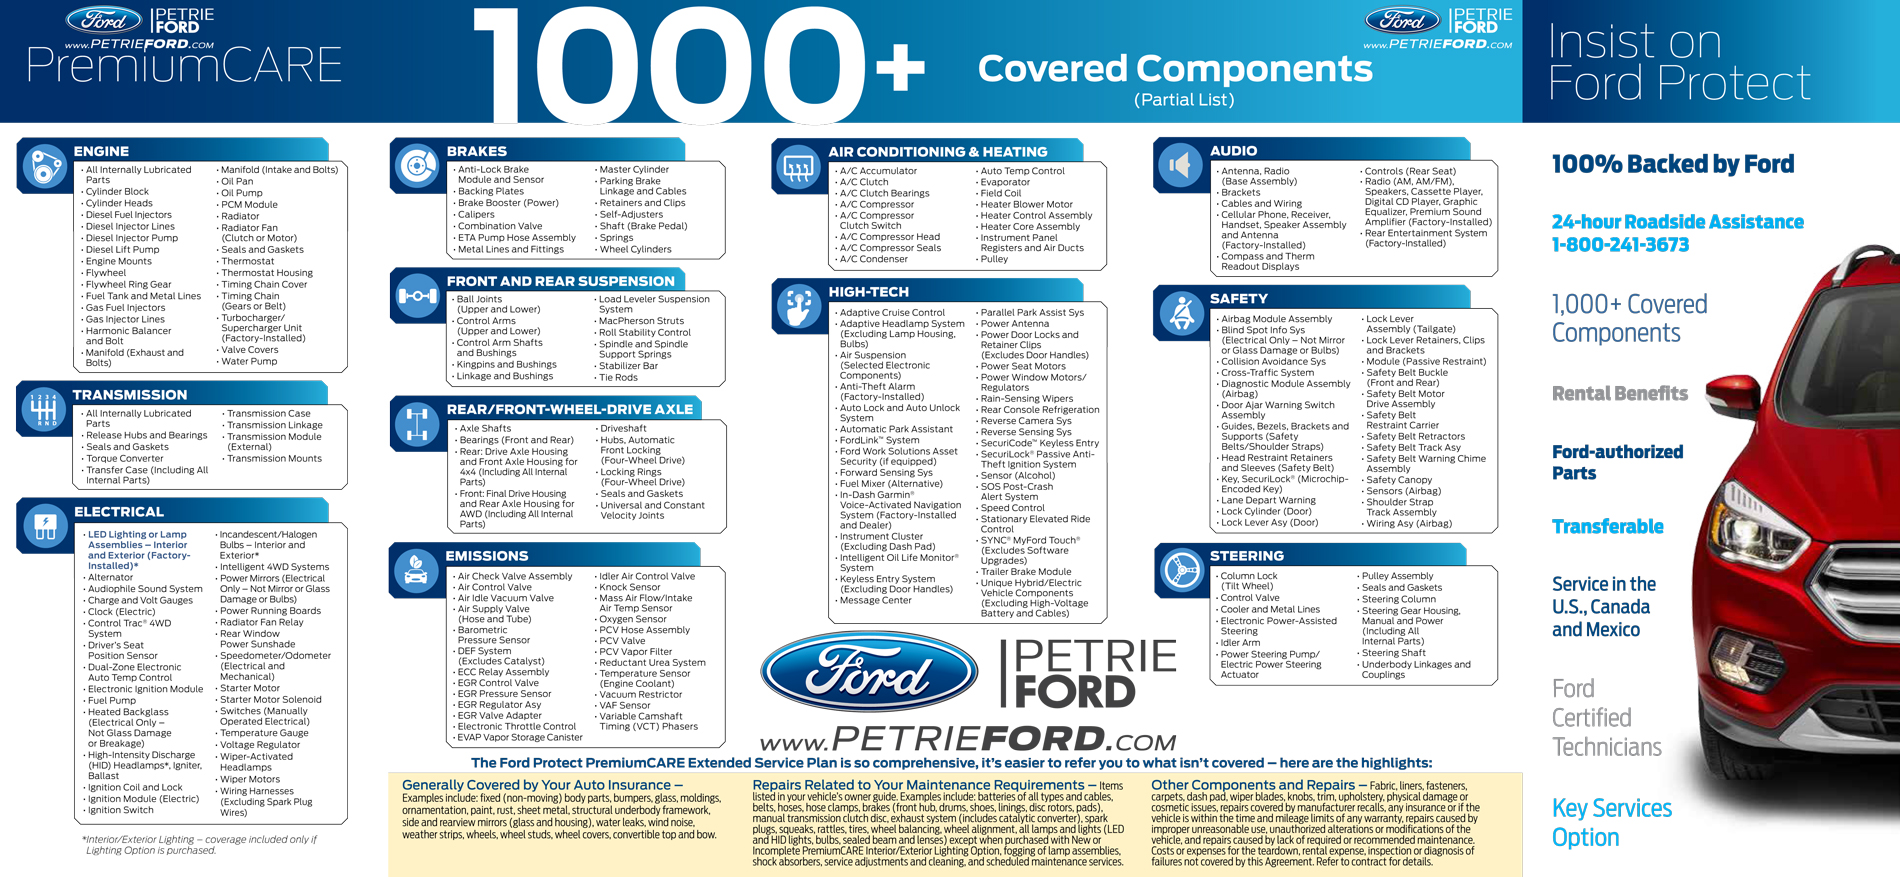 ford-canada-esp-extended-warranty-service-premium-care-plan-cost-purchase-buy-quote